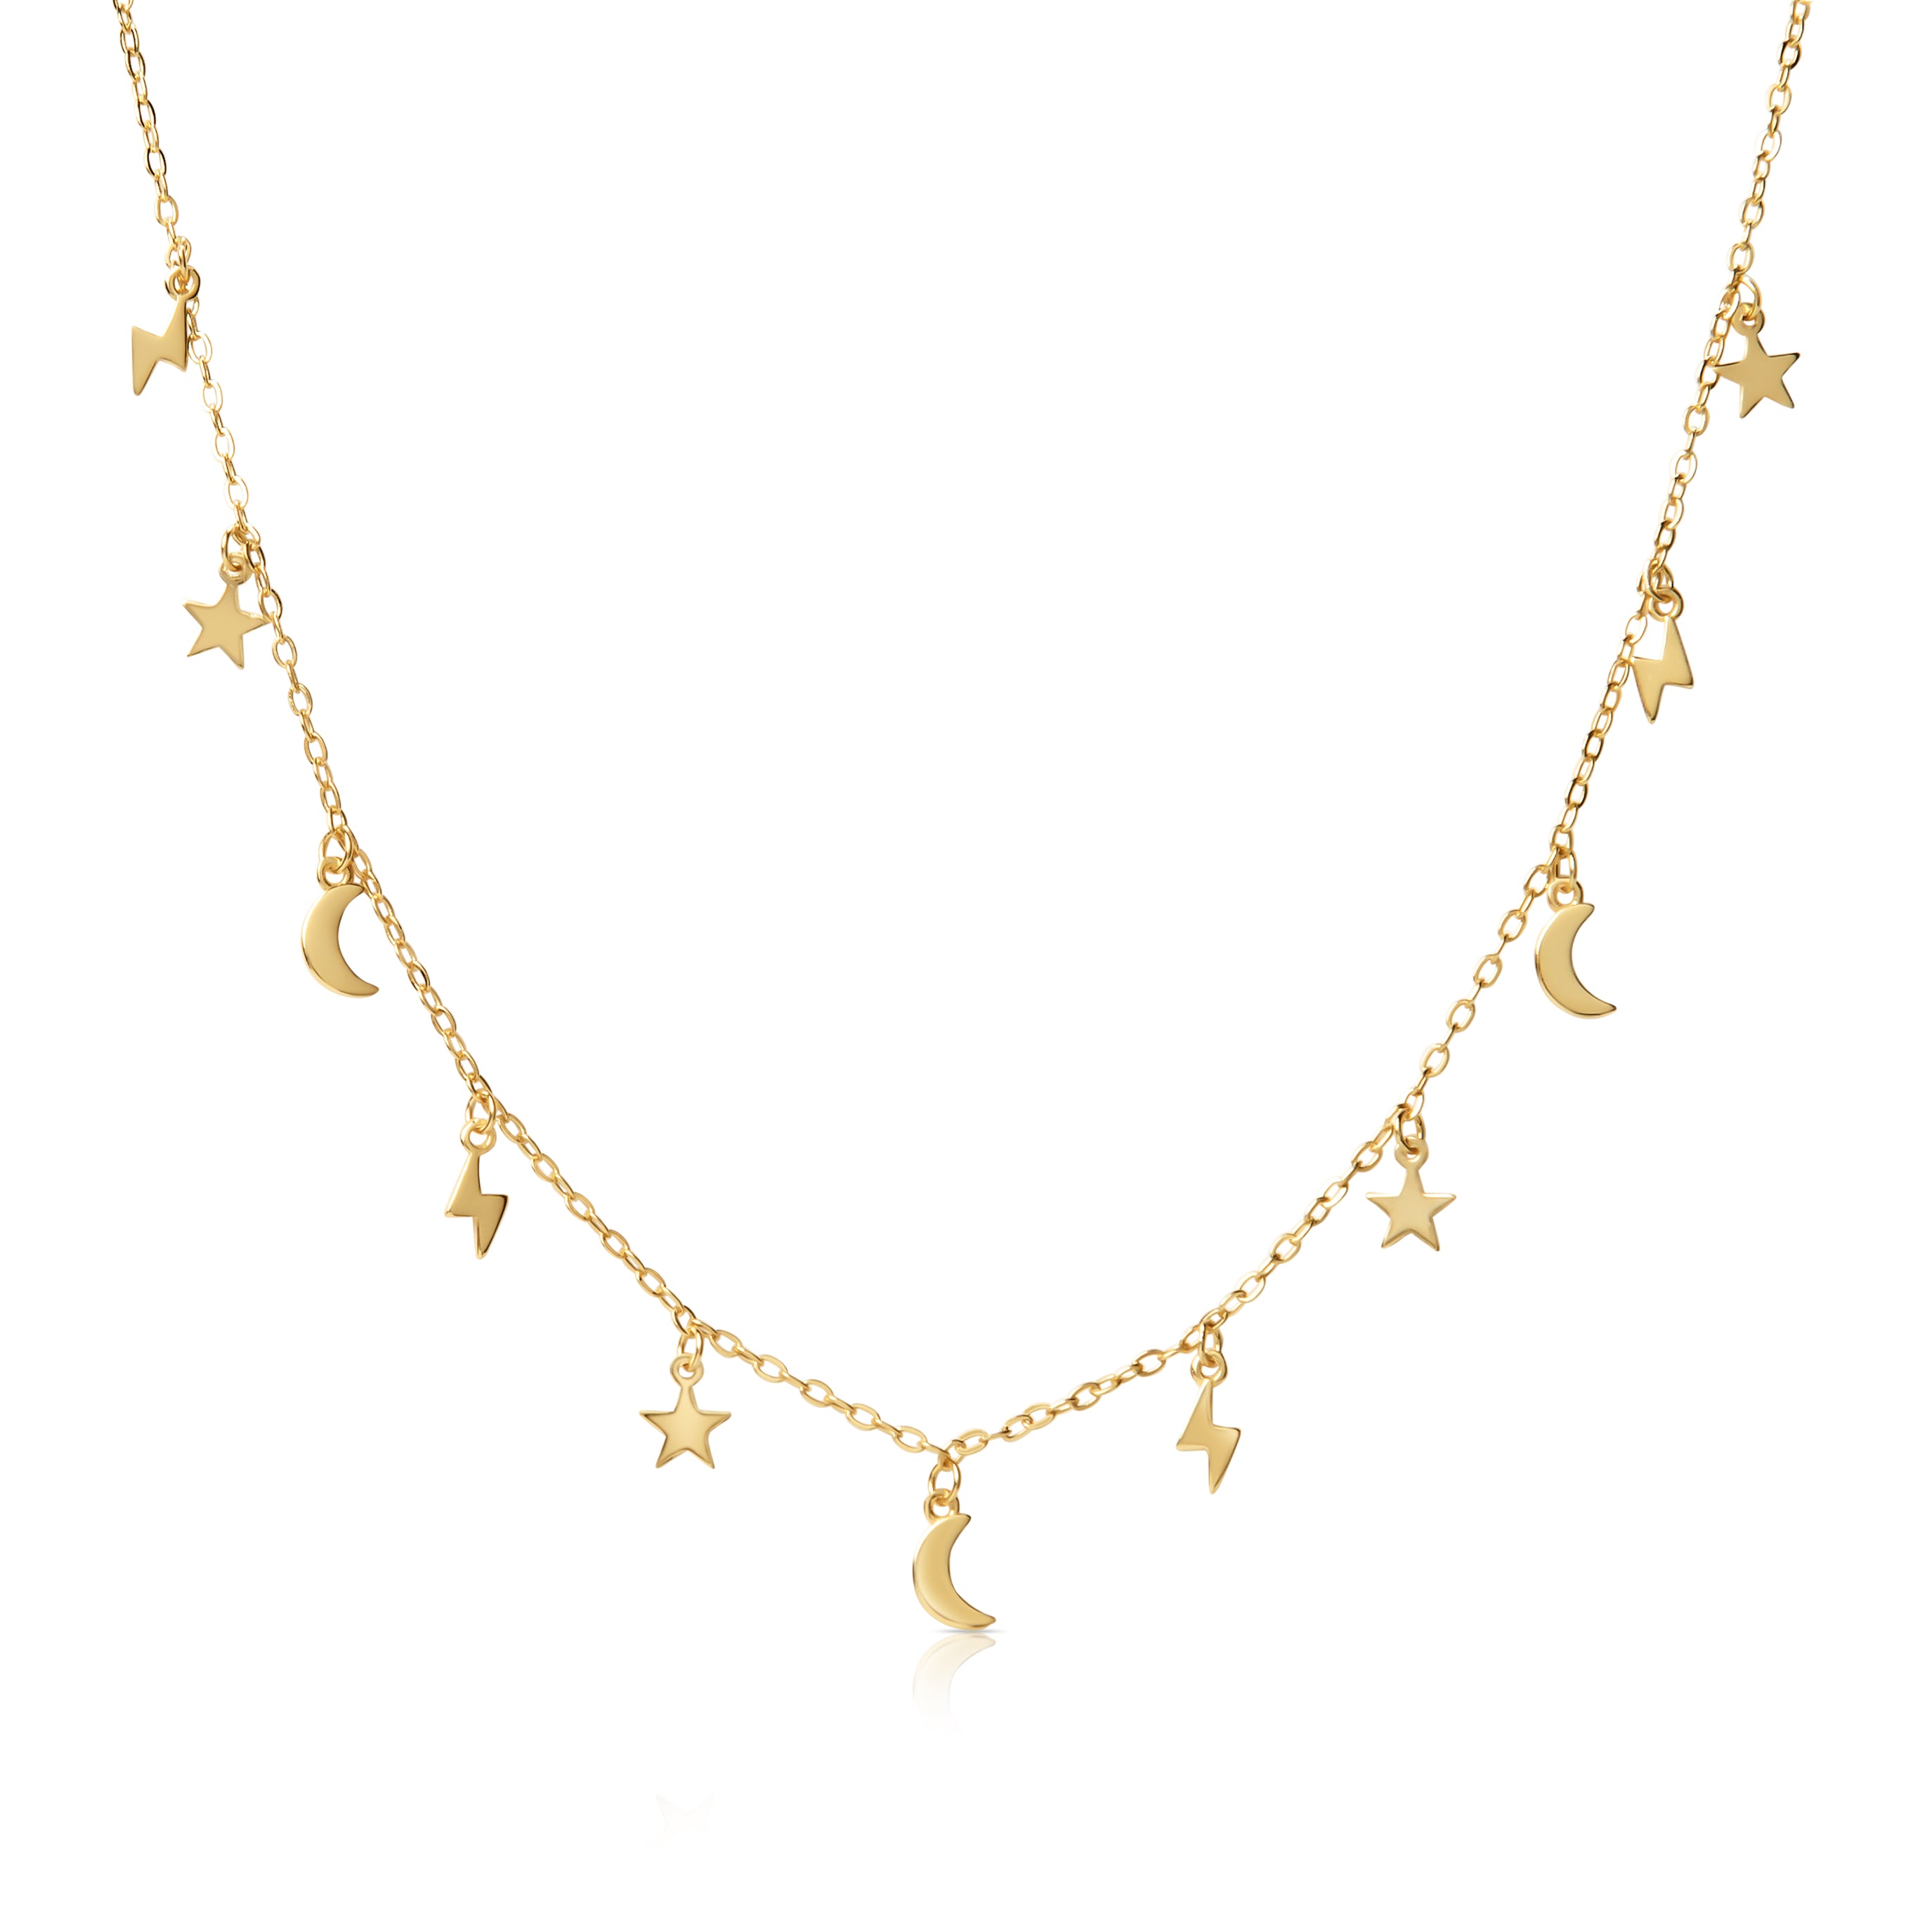 Madison Paper Clip Chain Necklace with Celestial-Themed Charms